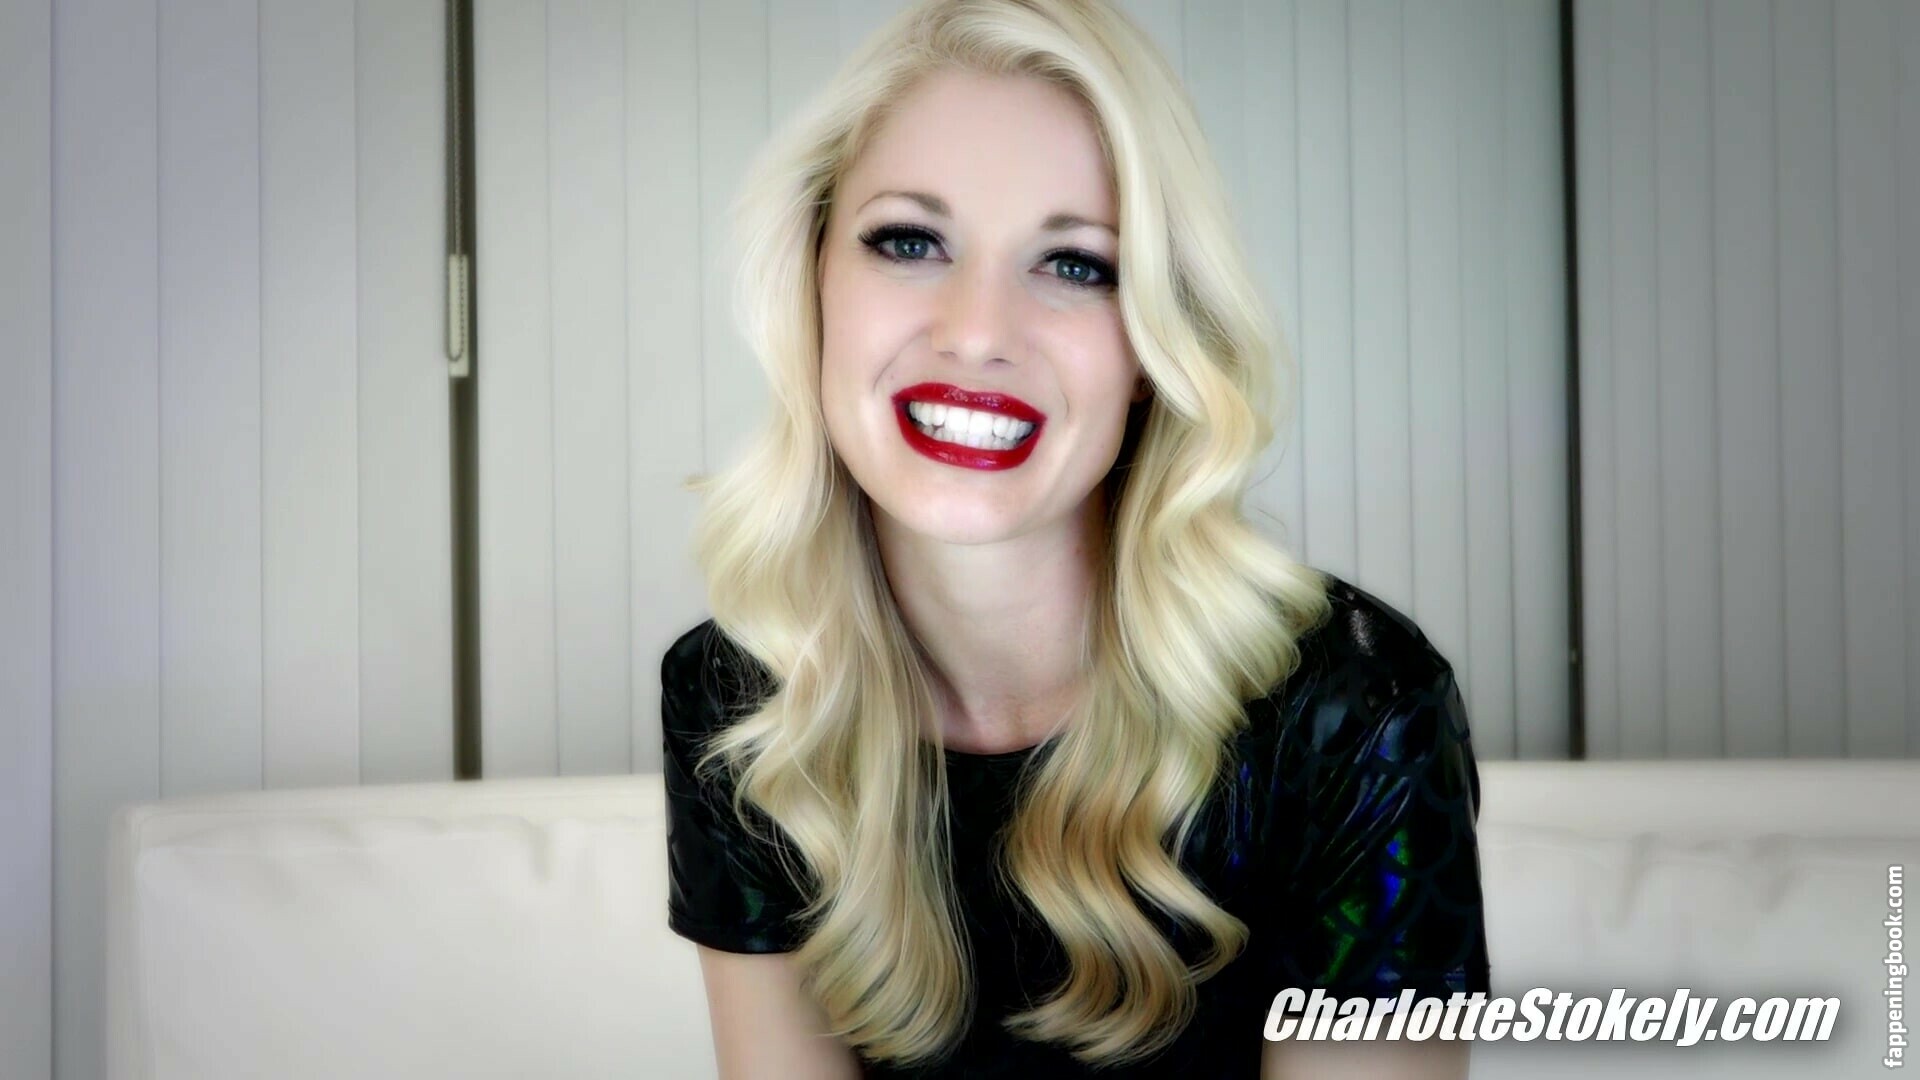 Charlotte Stokely Char Stokely Nude Onlyfans Leaks The Fappening